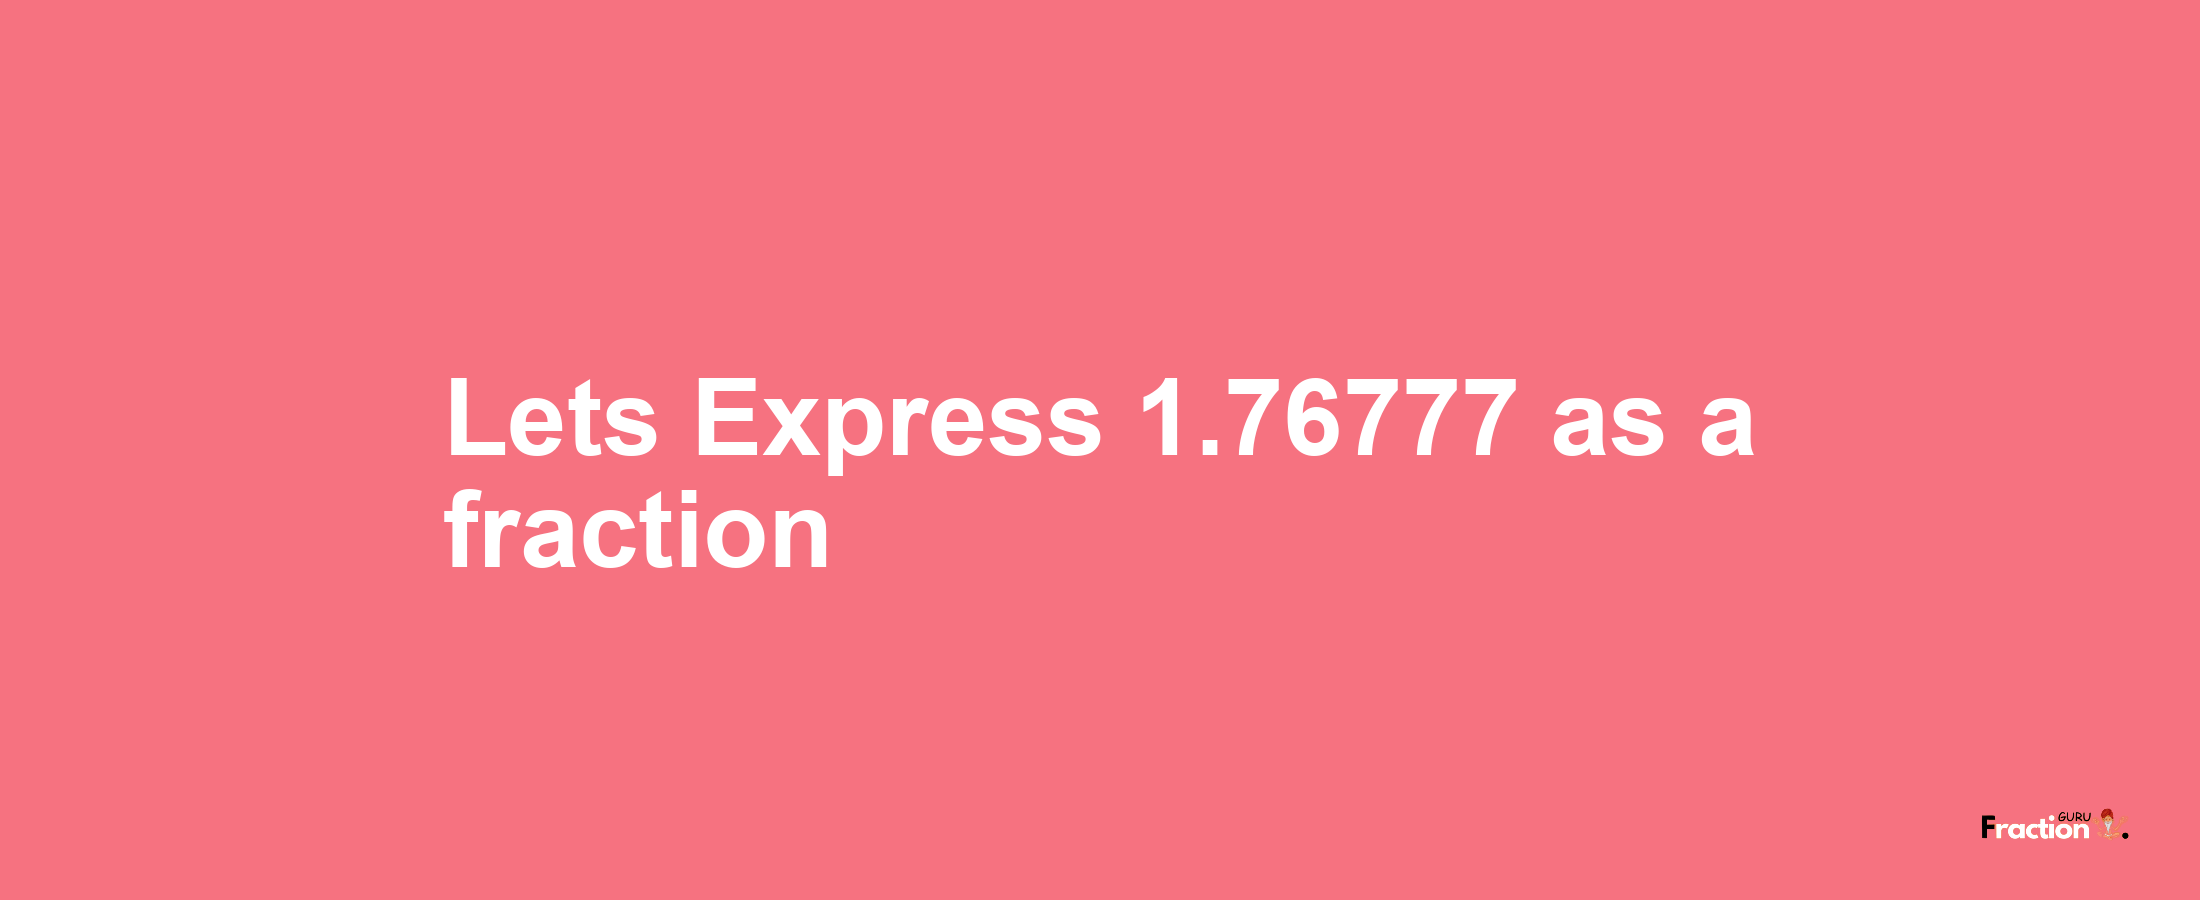 Lets Express 1.76777 as afraction